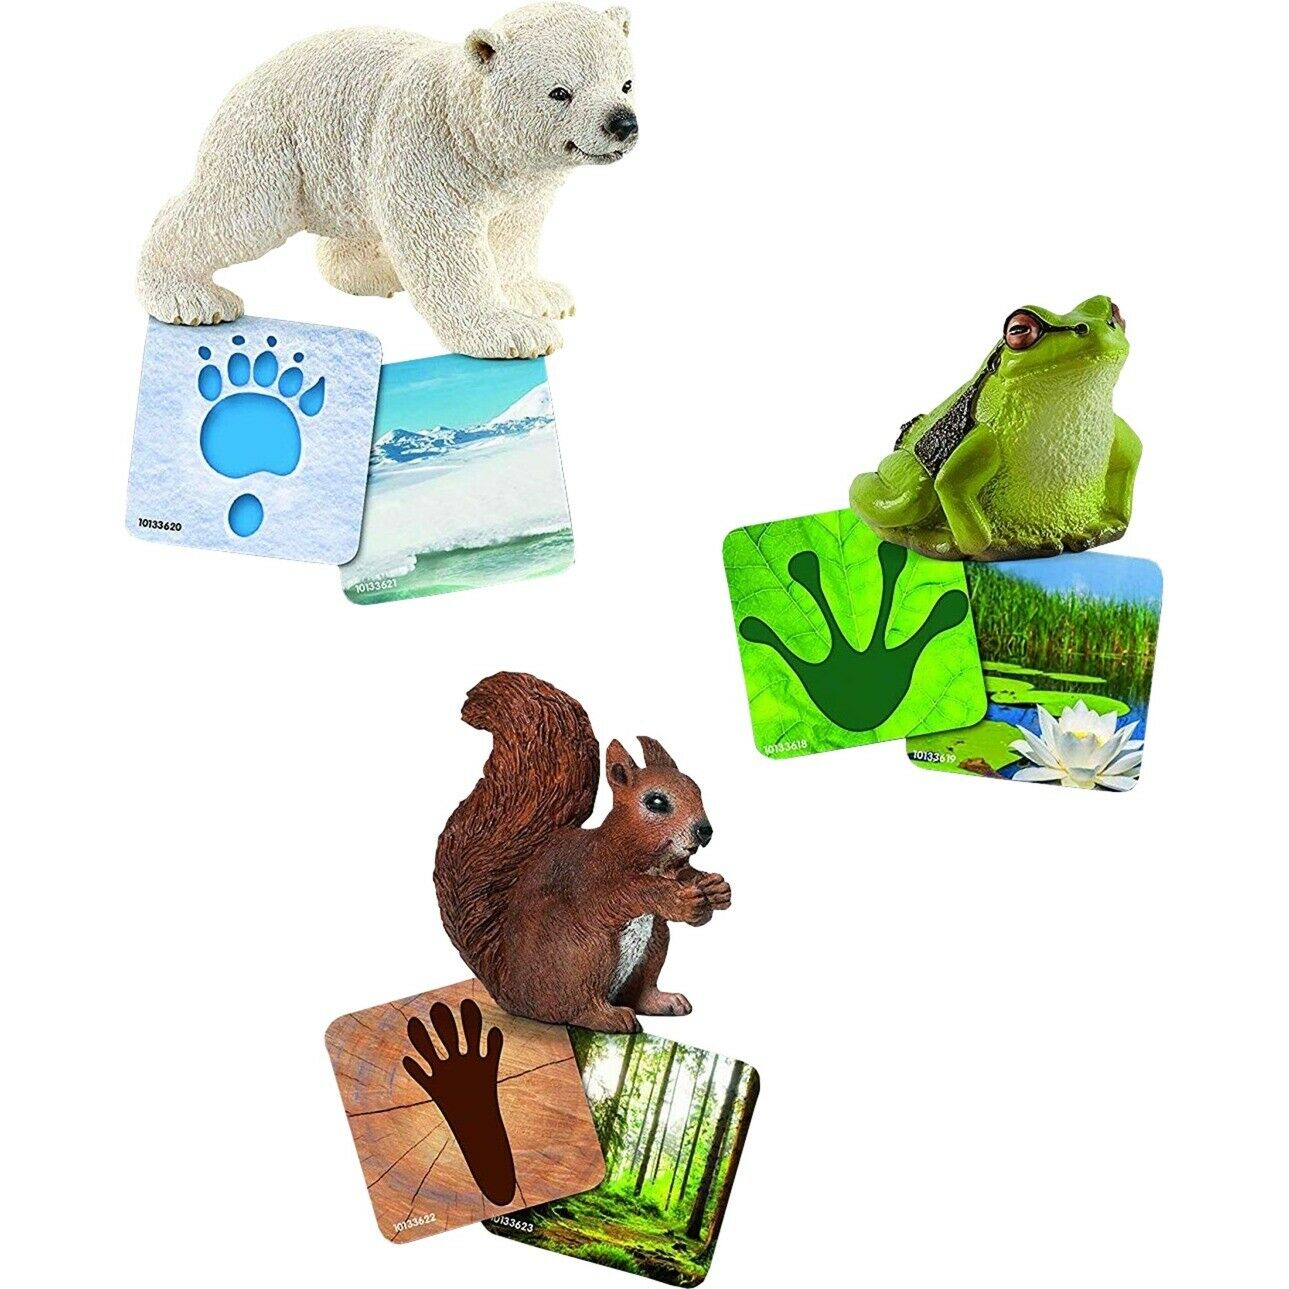 42474 Schleich Wild Life Flash cards Wild Life Card Game Age 3 Years+